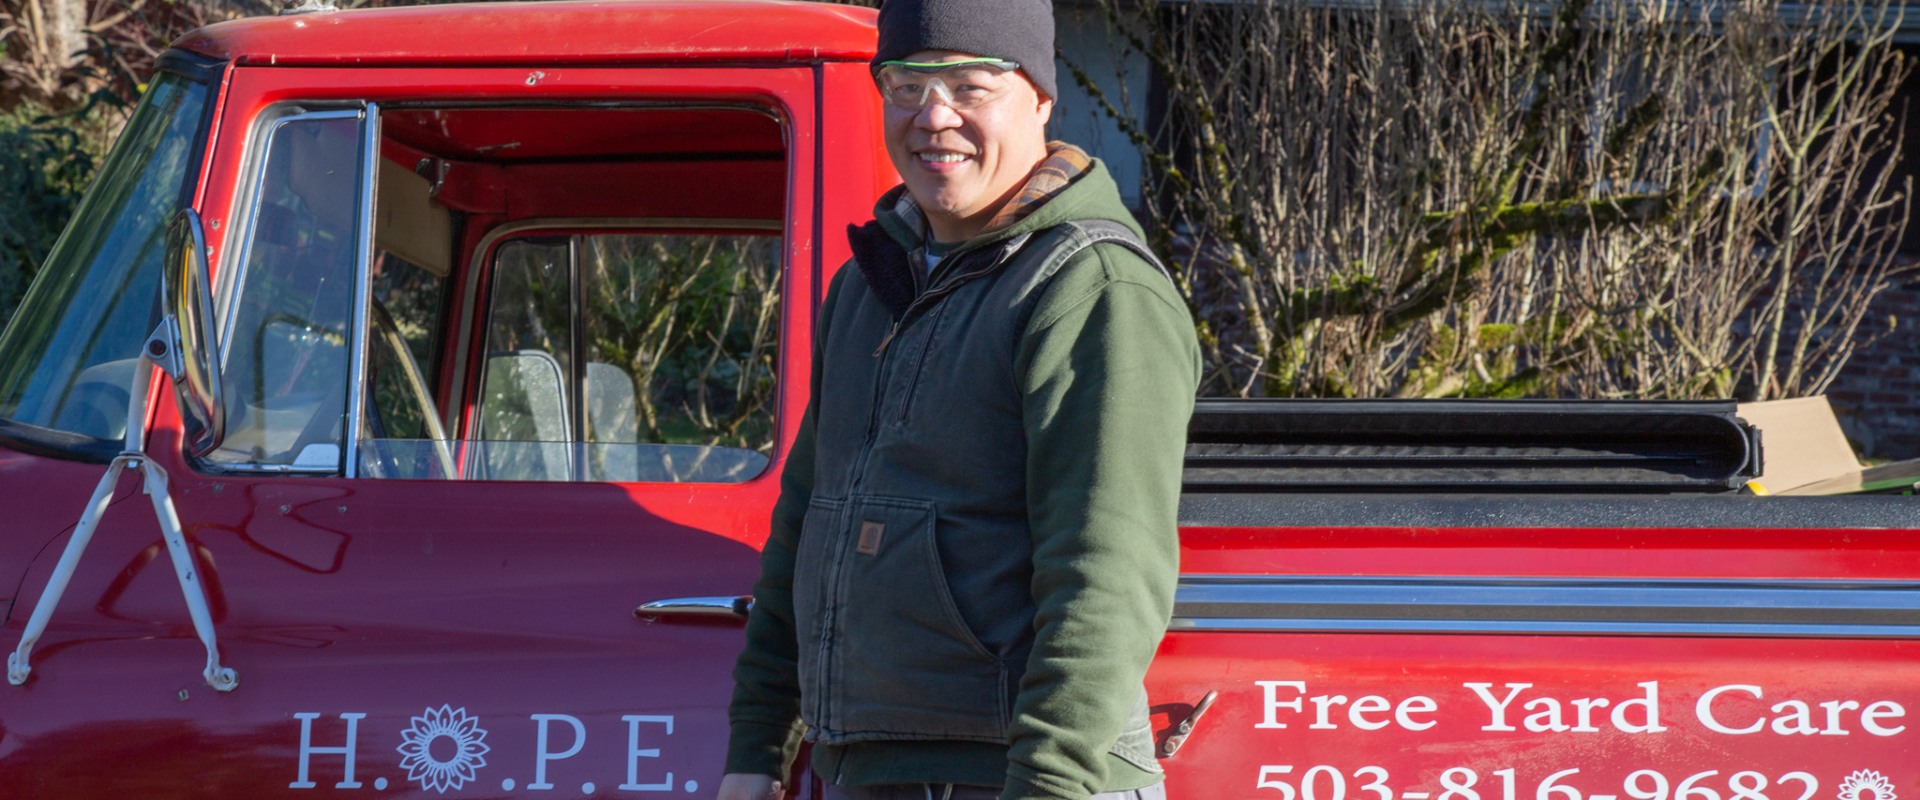 A man in a beanie stands next to a red truck